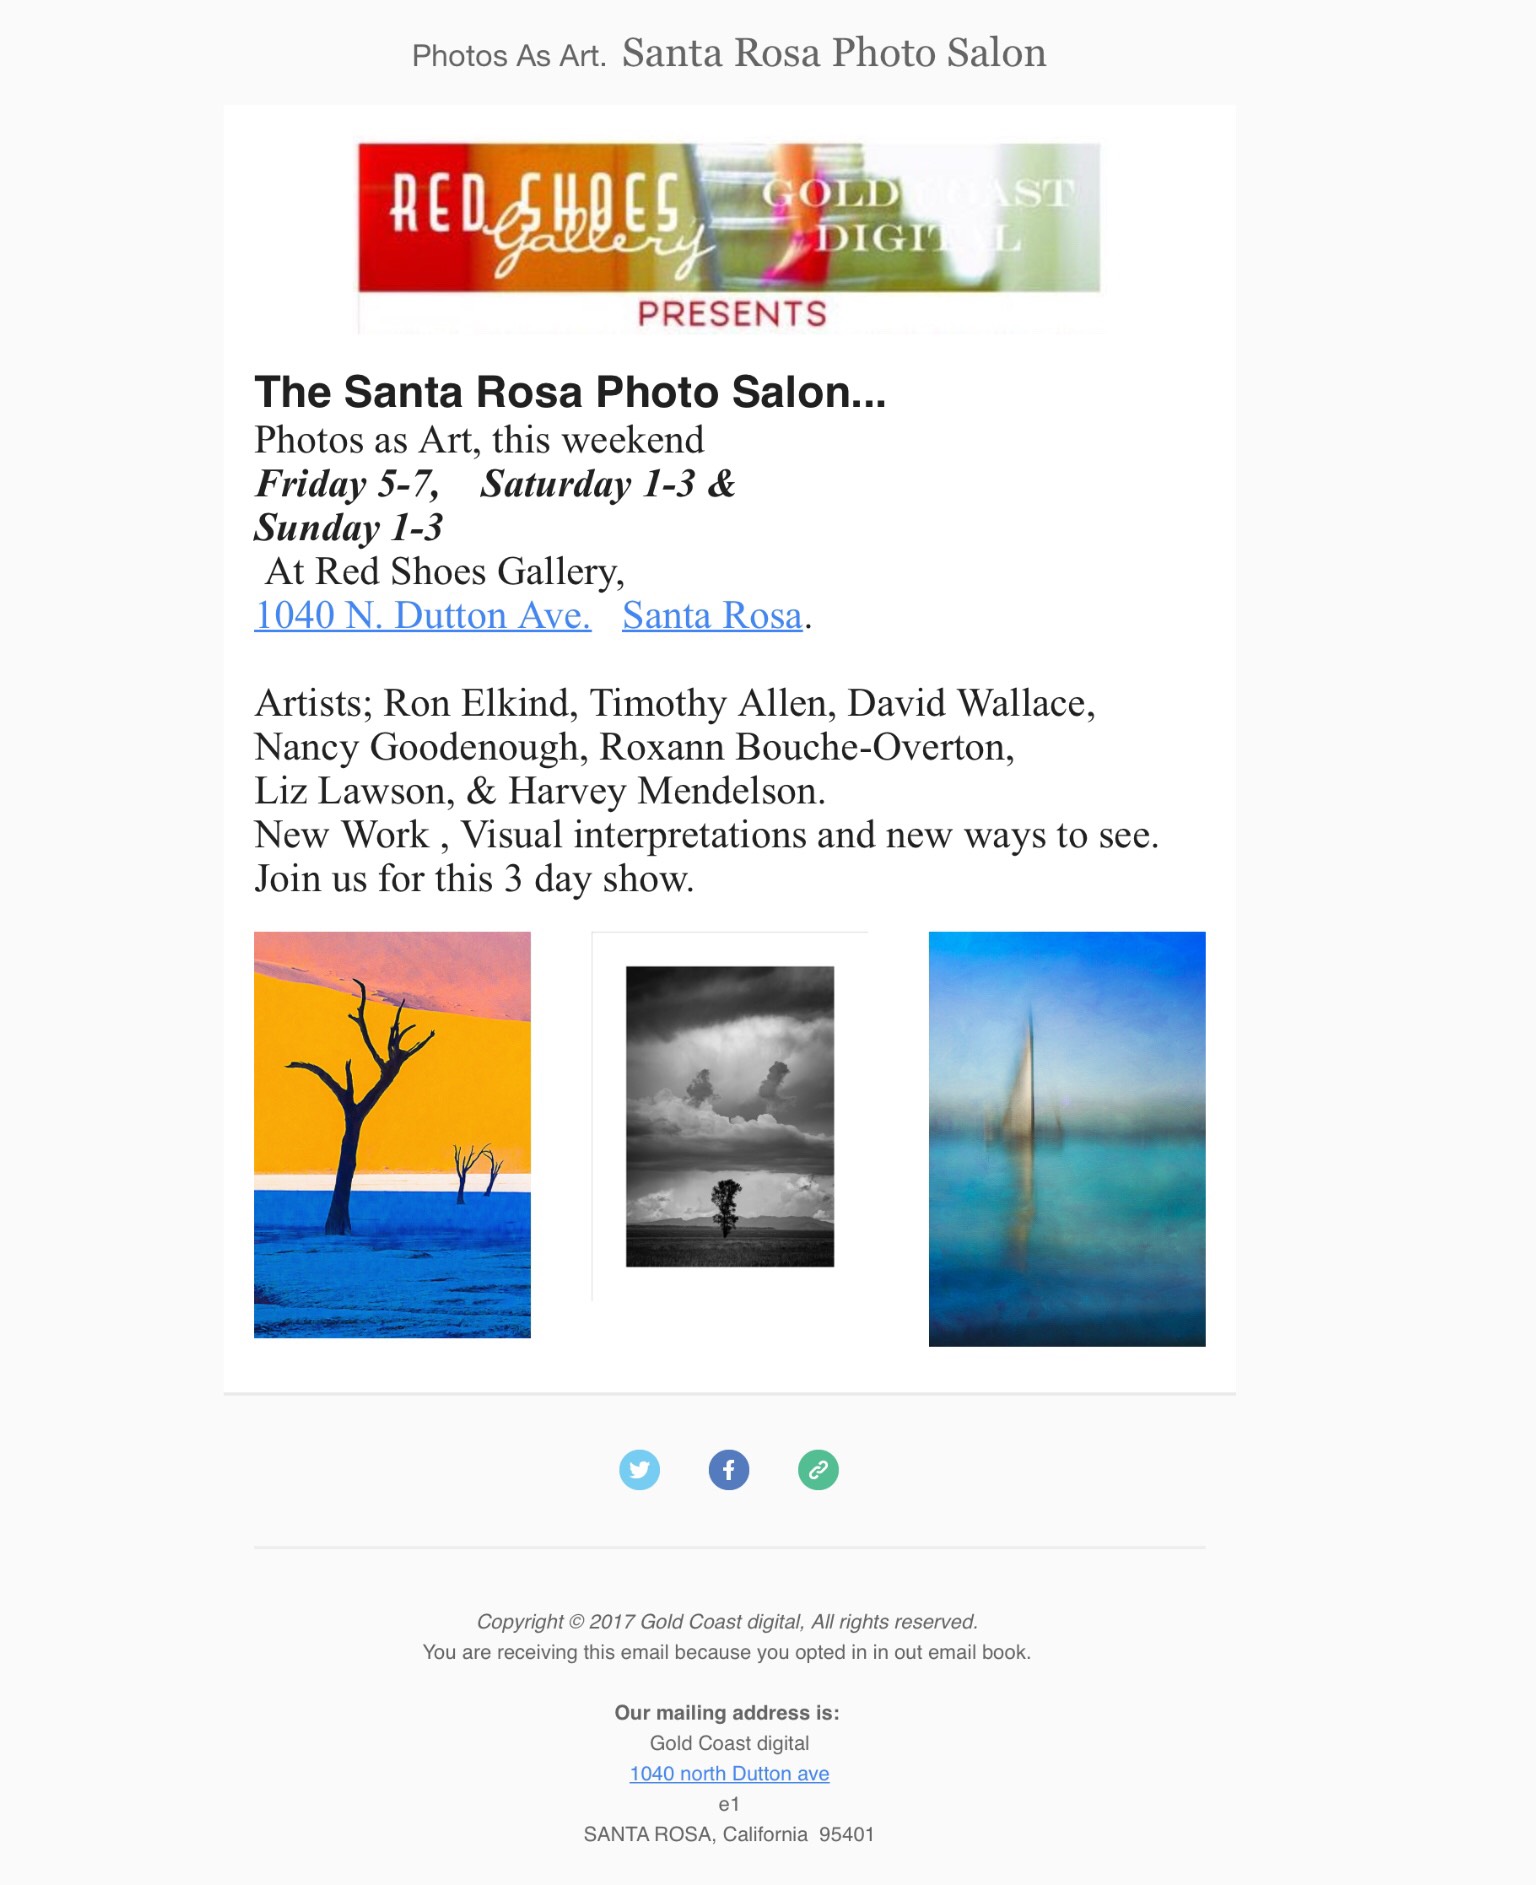 I'm in this group exhibition that opens Friday December 1 from 5-7 pm at the Red Shoes Gallery in Santa Rosa, CA. You can also see the exhibition on Saturday and Sunday from 1 - 3 pm. I have 6 photographs from my Eastern Sierras series with an emphasis on fall colors. They are all on metal and under $99 dollars each. I hope to see you there.